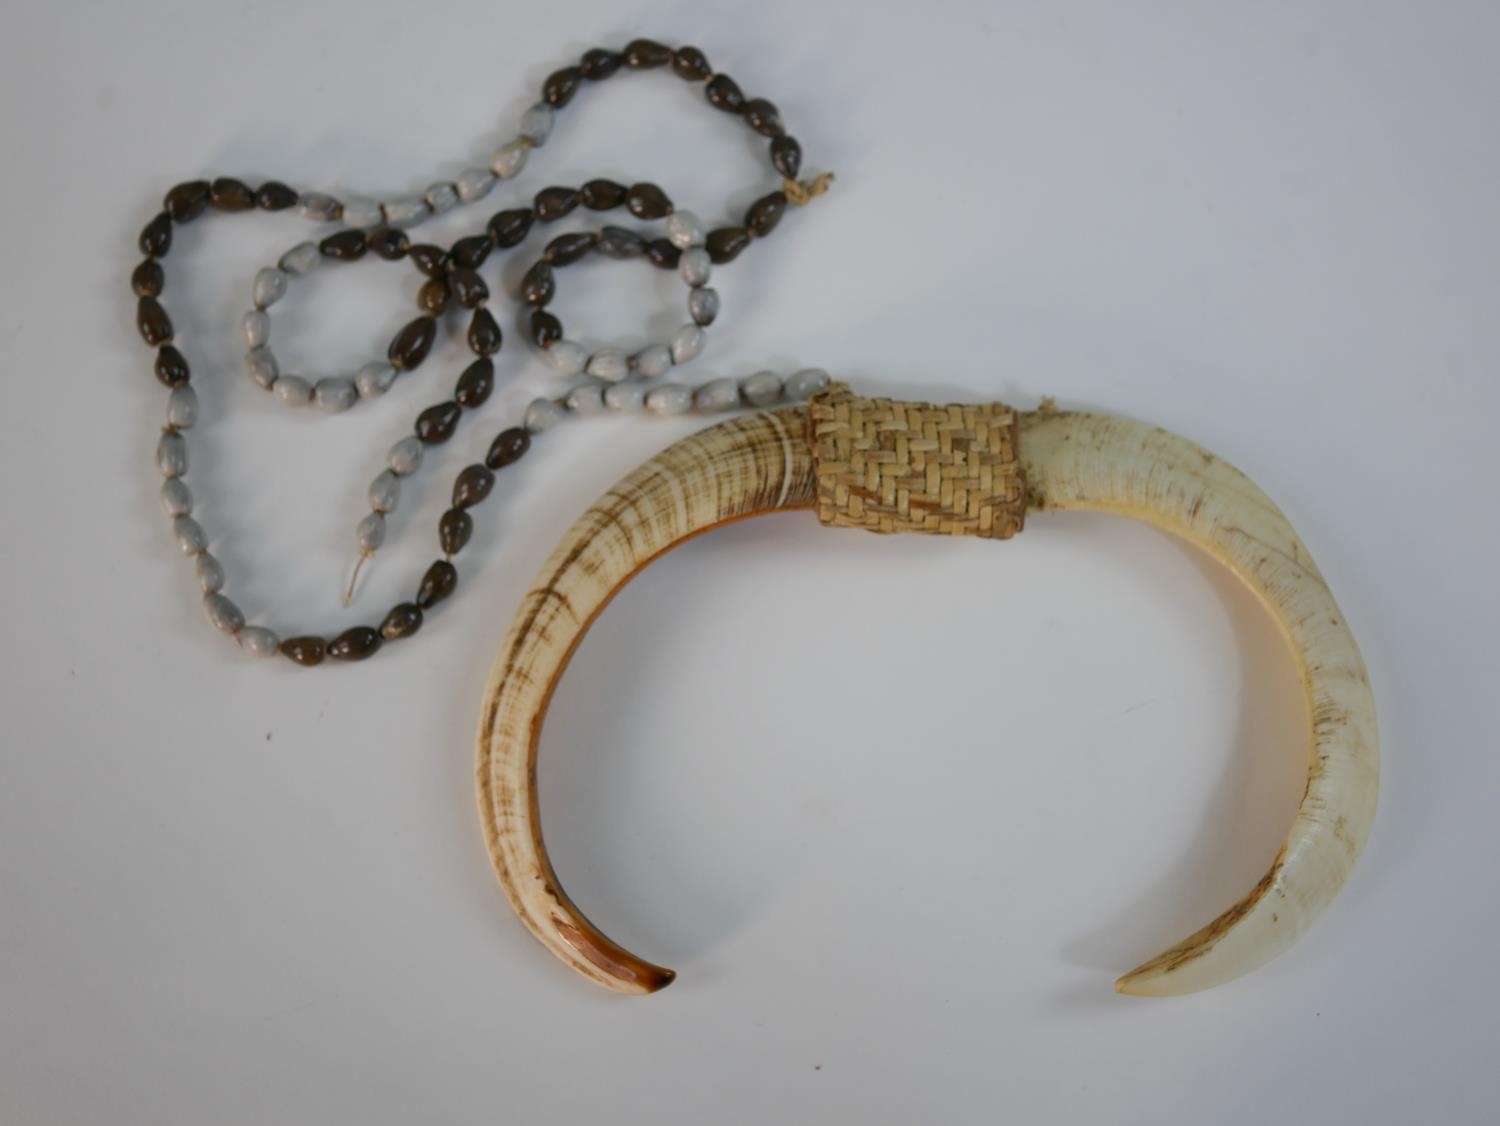 A collection of 20th century Papua New Guinea animal tusk necklaces and amulets, some bound with - Image 4 of 6